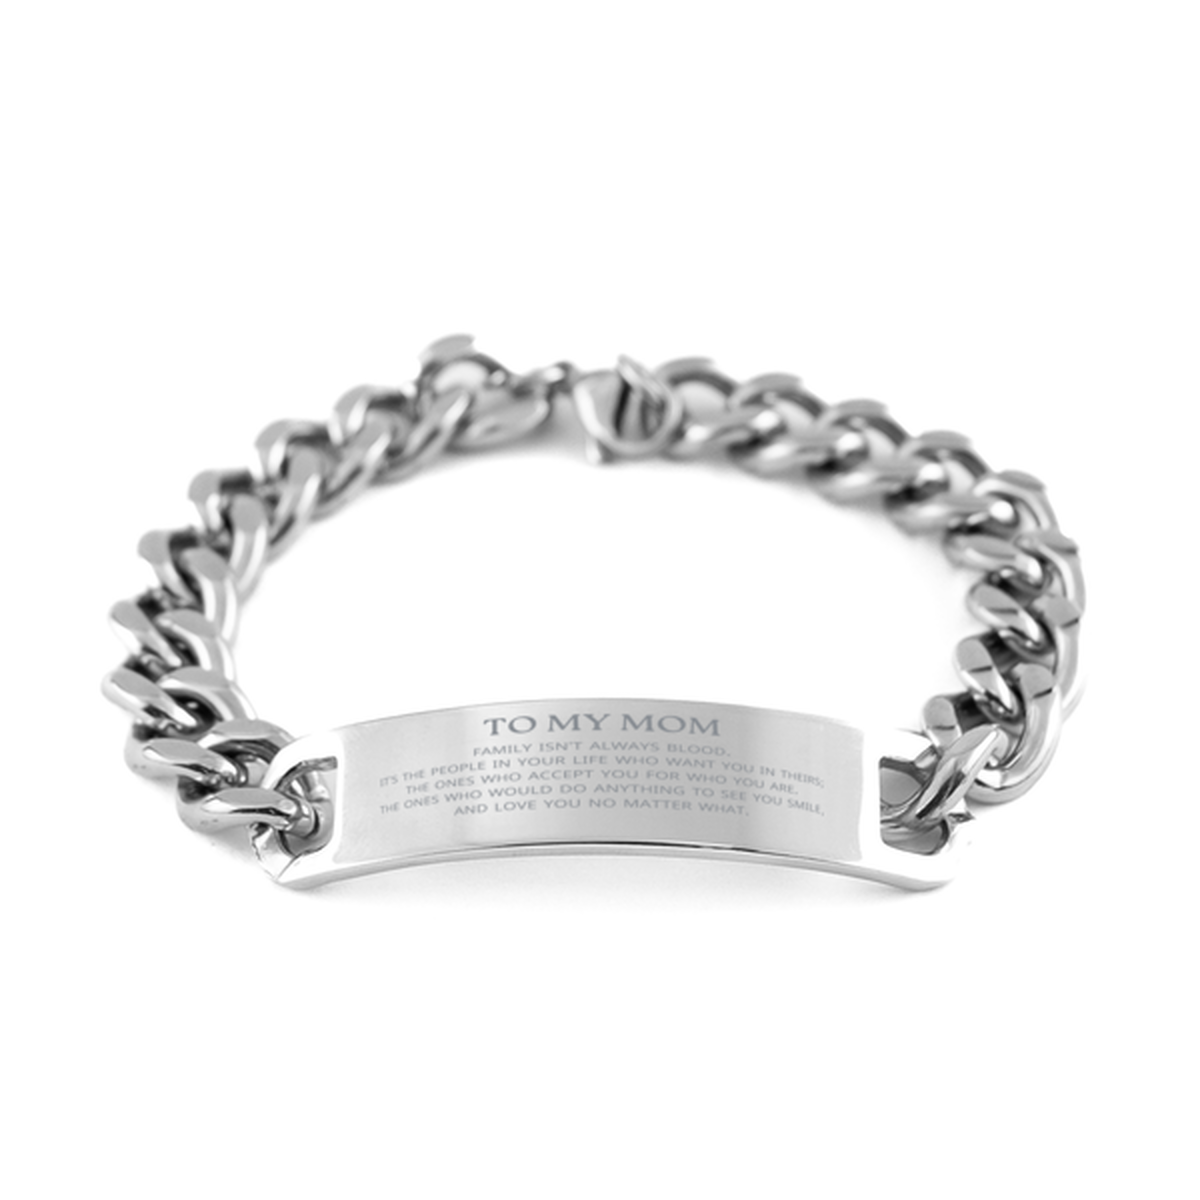 To My Mom Gifts, Family isn't always blood, Mom Cuban Chain Stainless Steel Bracelet, Birthday Christmas Unique Present For Mom